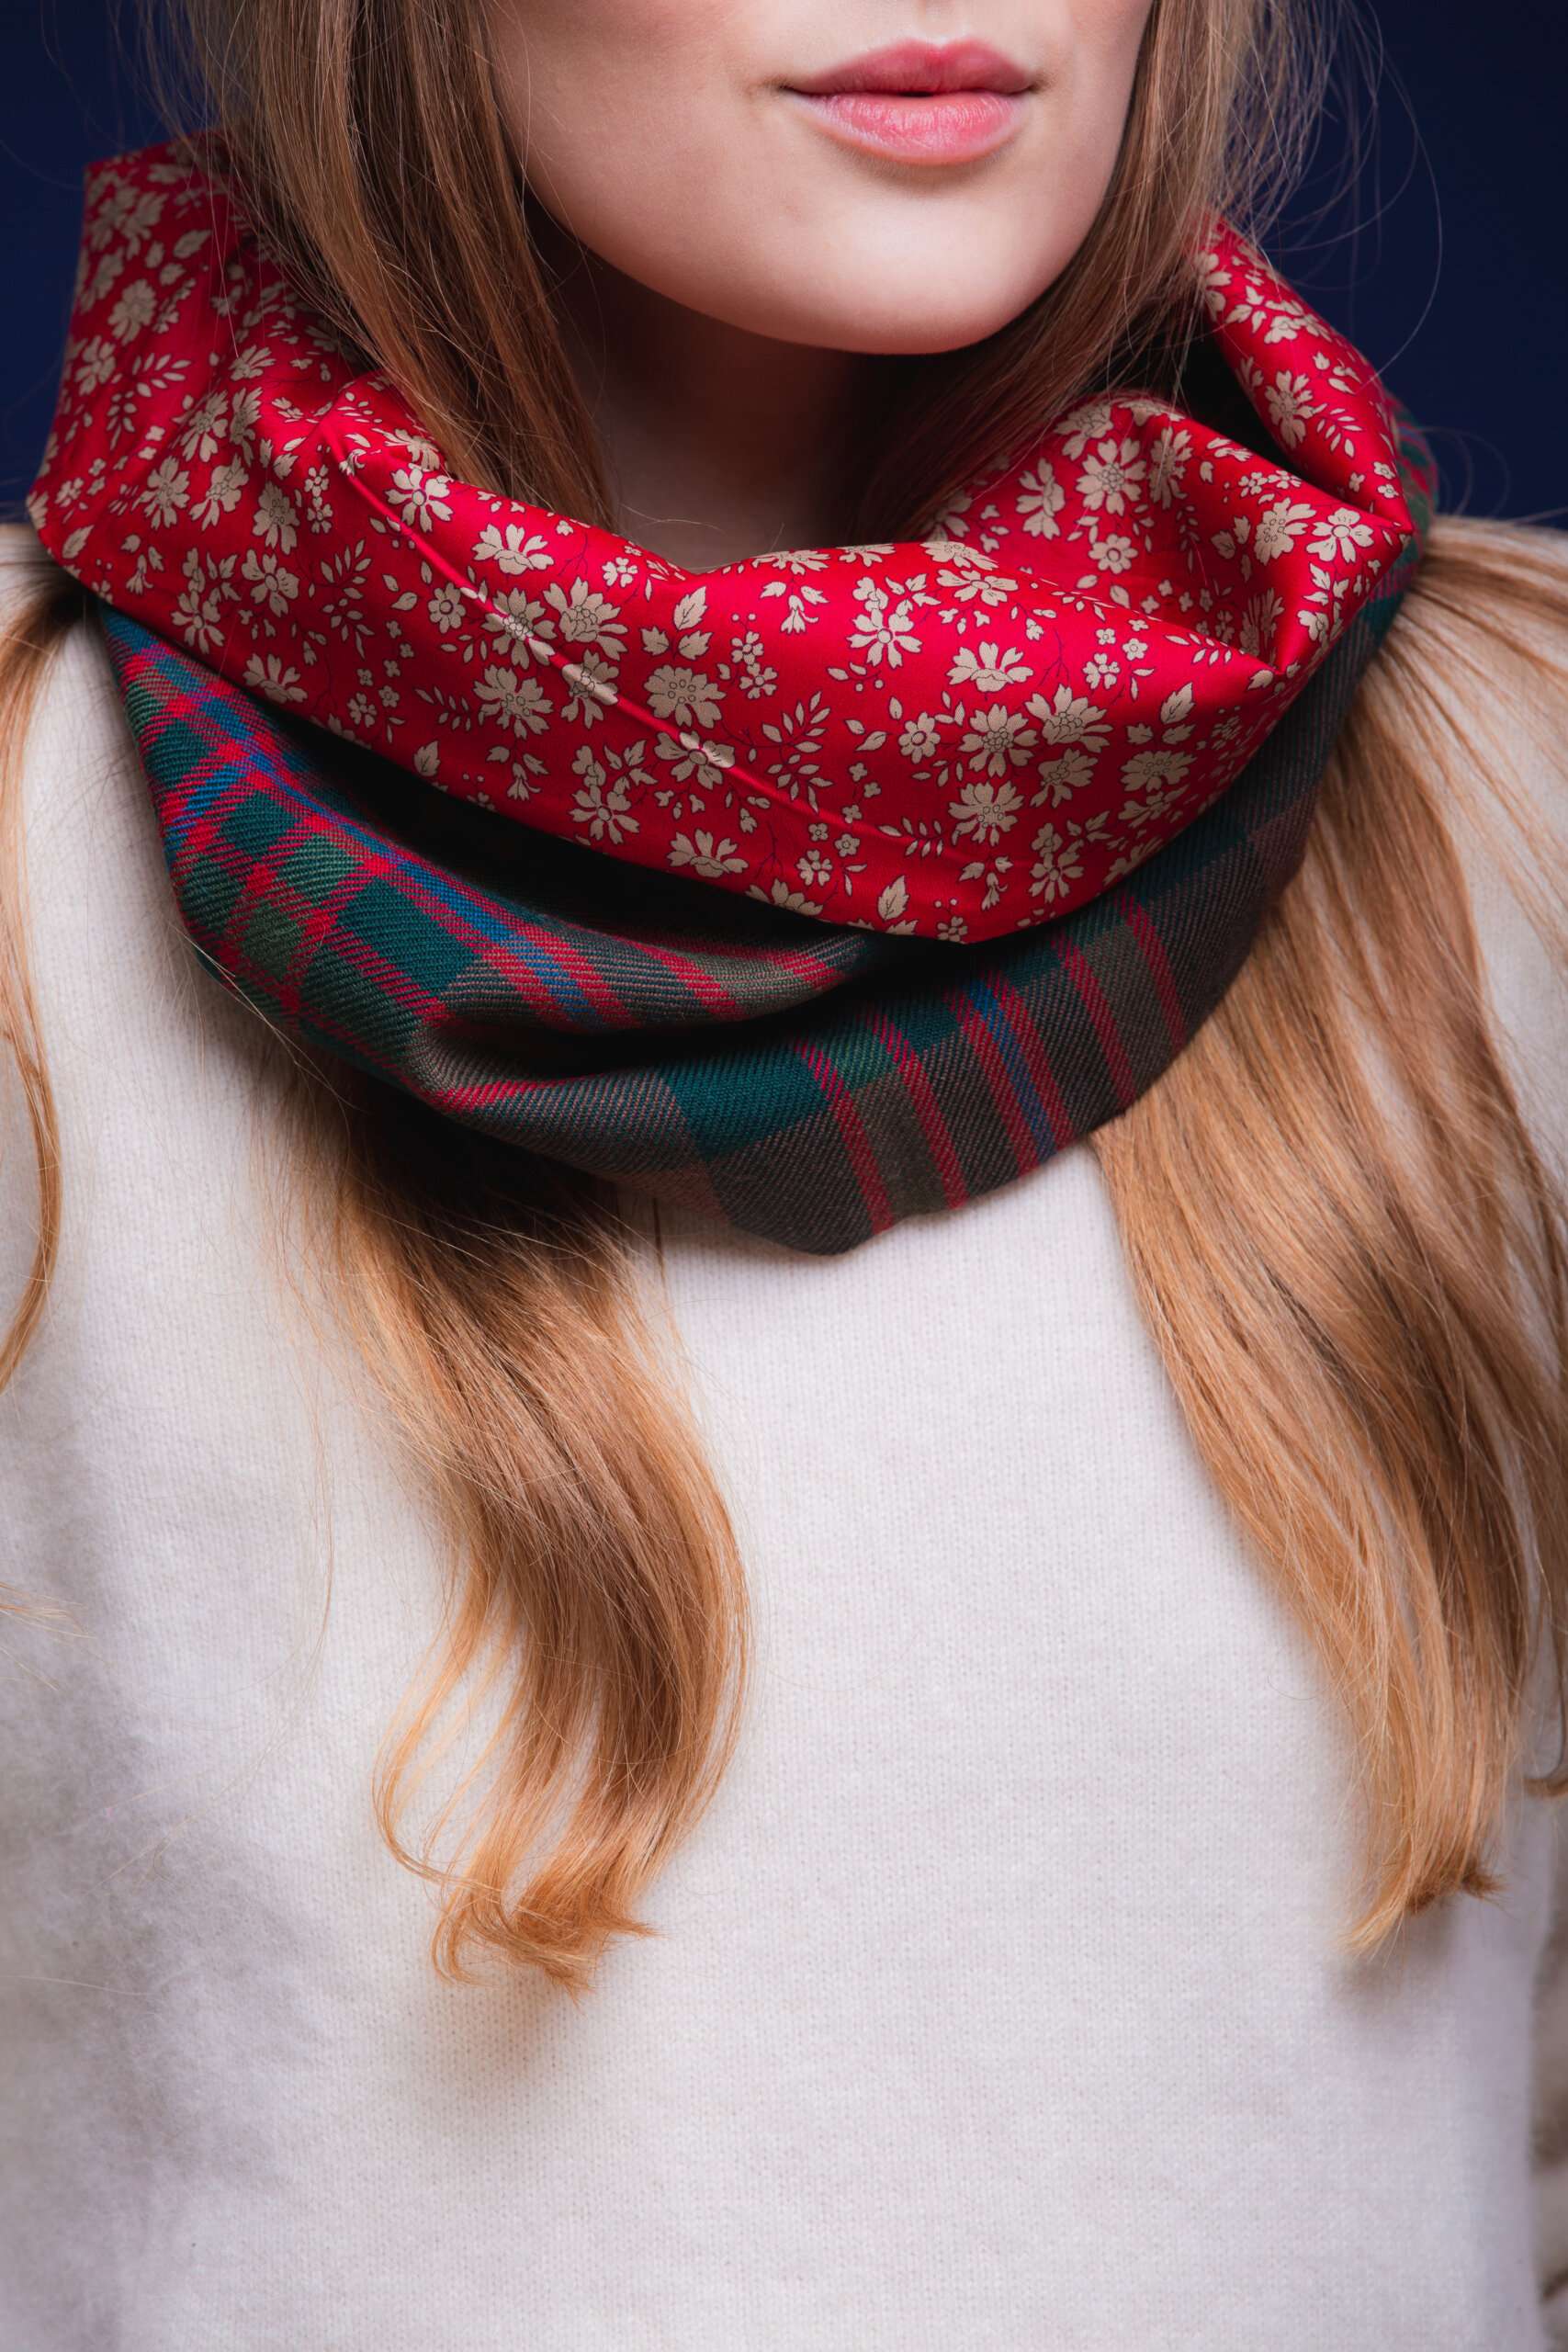 LoullyMakes Studio 4 53 scaled Classic Cowl in our own exclusive John Muir Way Tartan with Liberty Print tana lawn cotton lining. Simply select your choice of coloured lining from the drop-down menu. ( The example cowl pictured here features lining 5 ) This easy-to-wear cowl combines effortless styling and sublime warmth, being formed from a simple superfine cotton lined "tube" of 100% wool John Muir Way Tartan. Simply pop over your head and wear the cowl high, to keep out the chill, or roll over the neckline to feature a flourish of an iconic art fabric. 100% Wool Tartan, 100% cotton lining